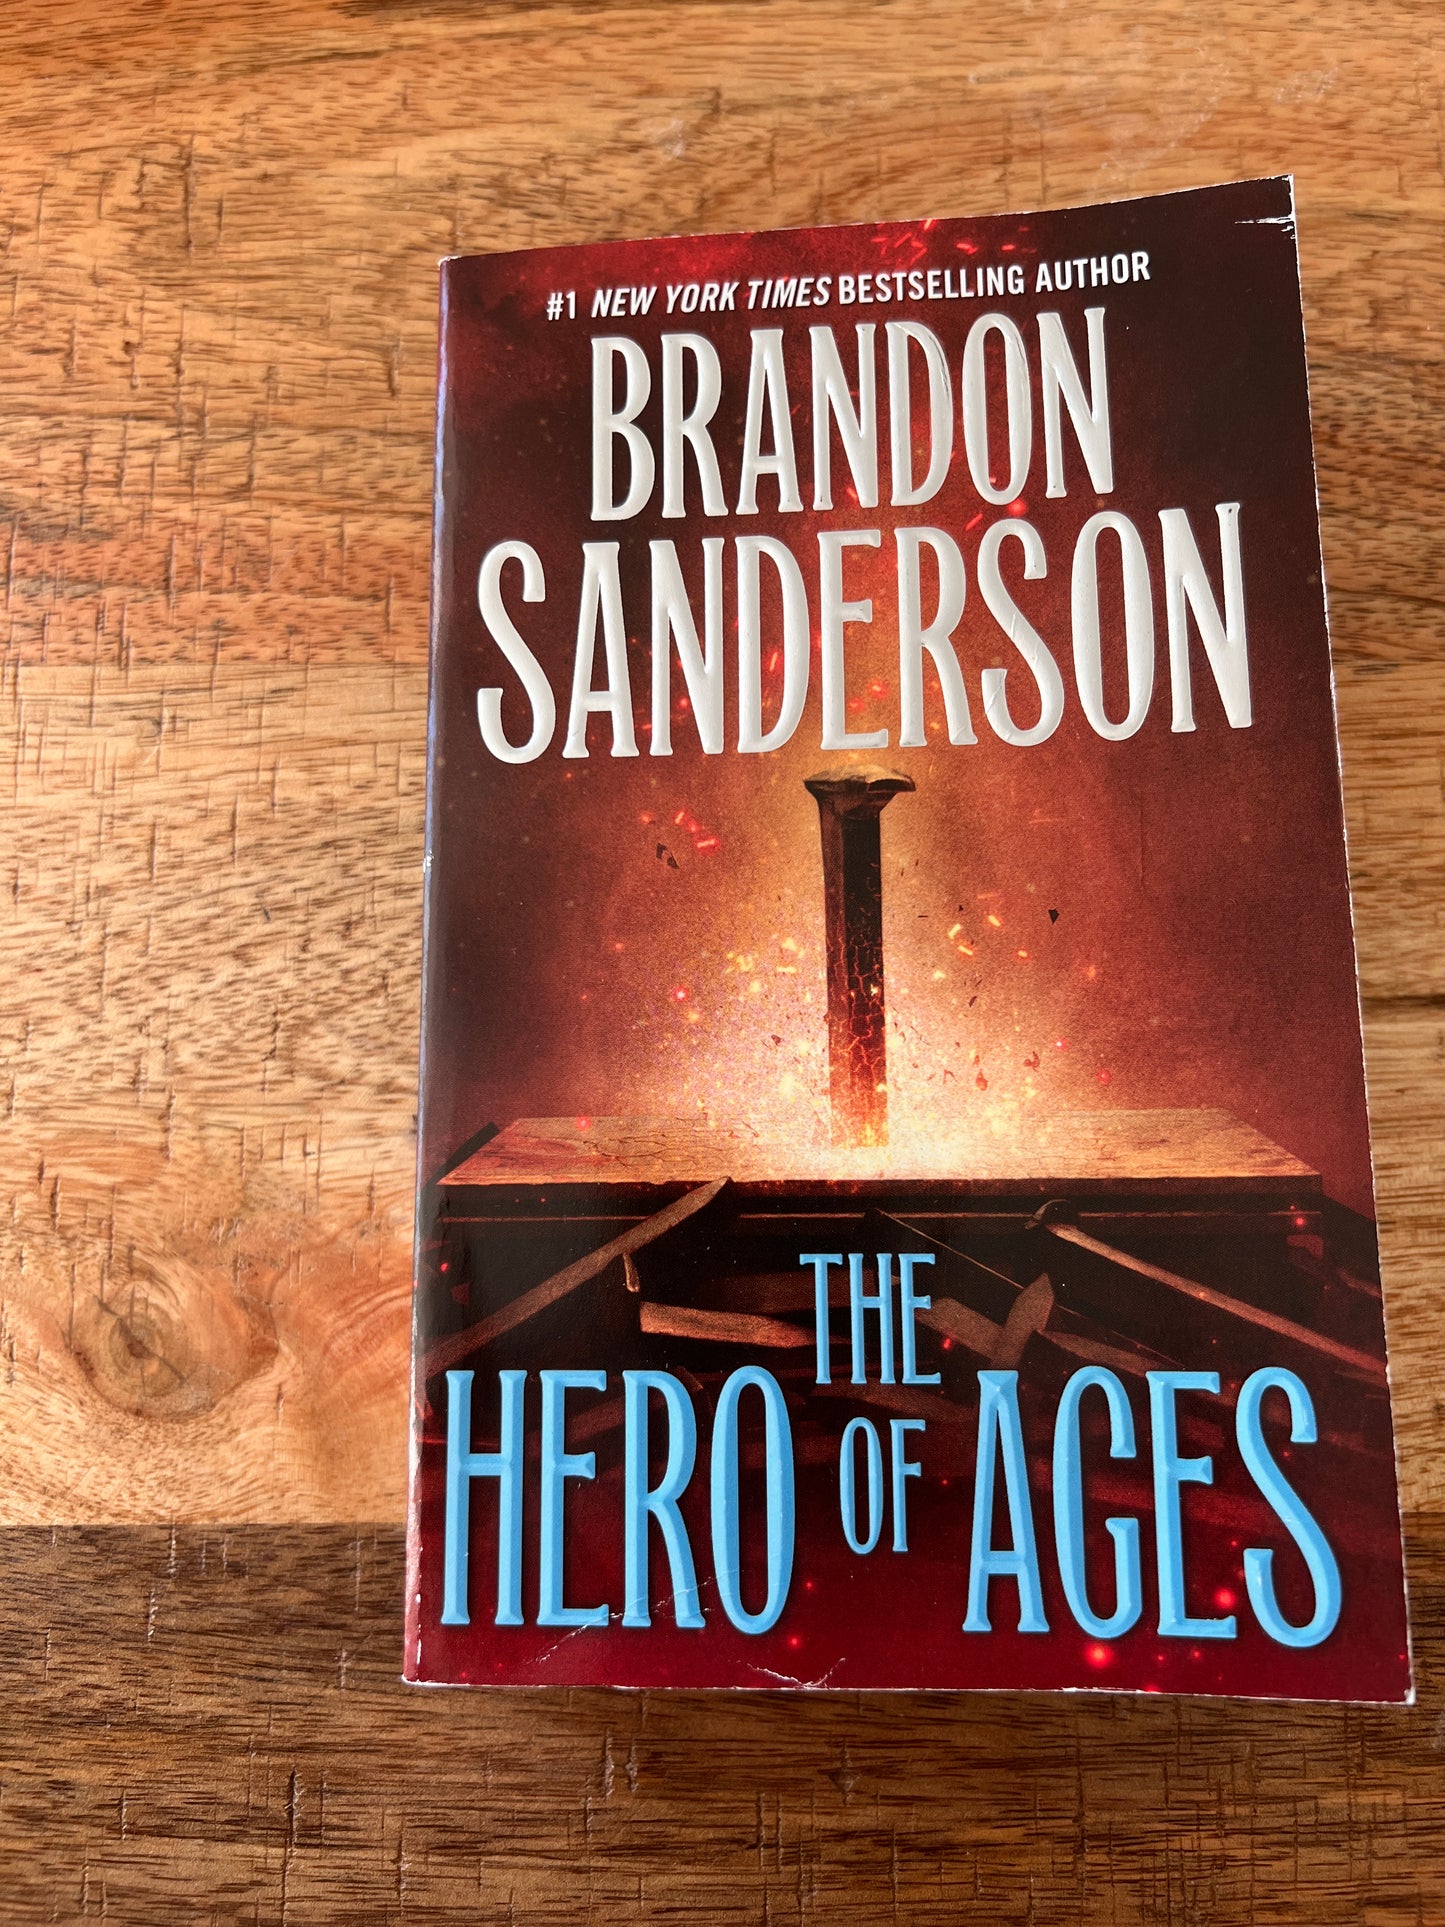 The Hero of Ages (Mistborn #3)